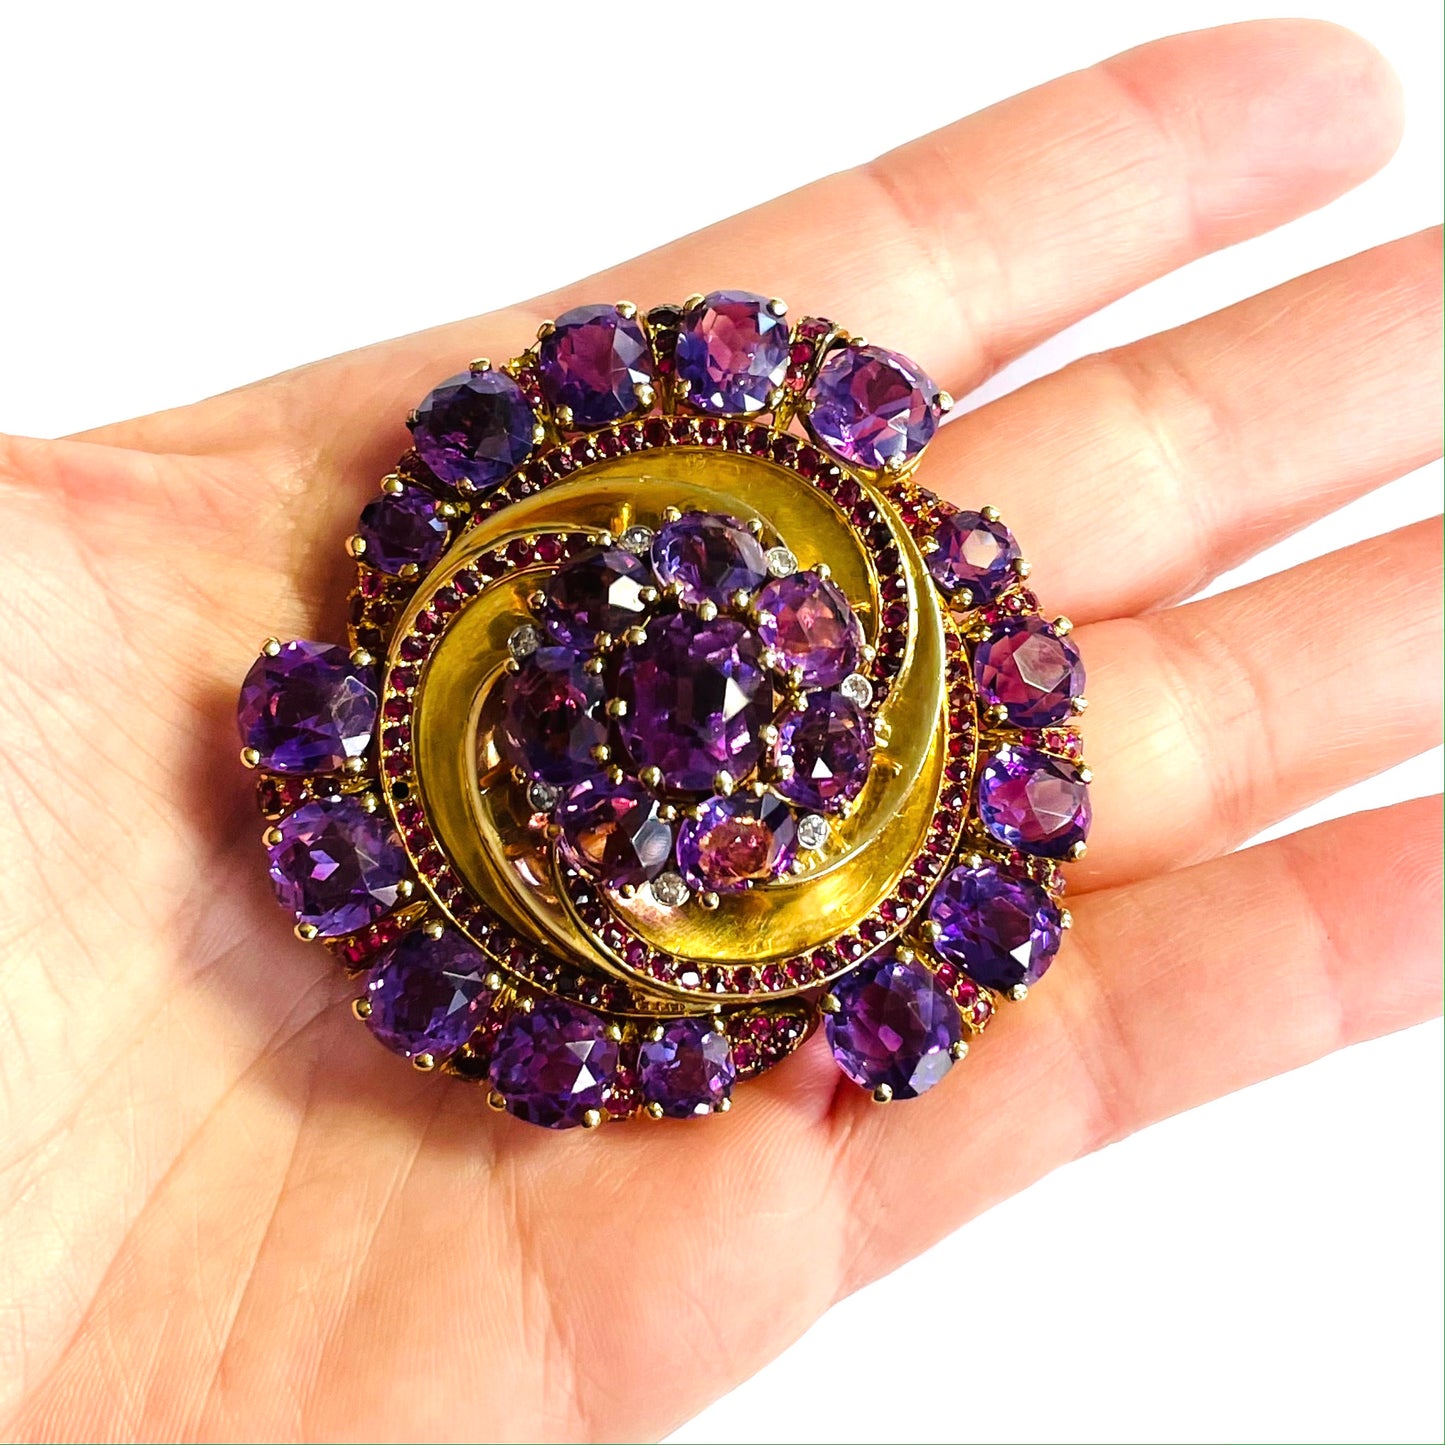 French 1940s 18KT Yellow Gold Amethyst, Diamond & Ruby Brooch in hand